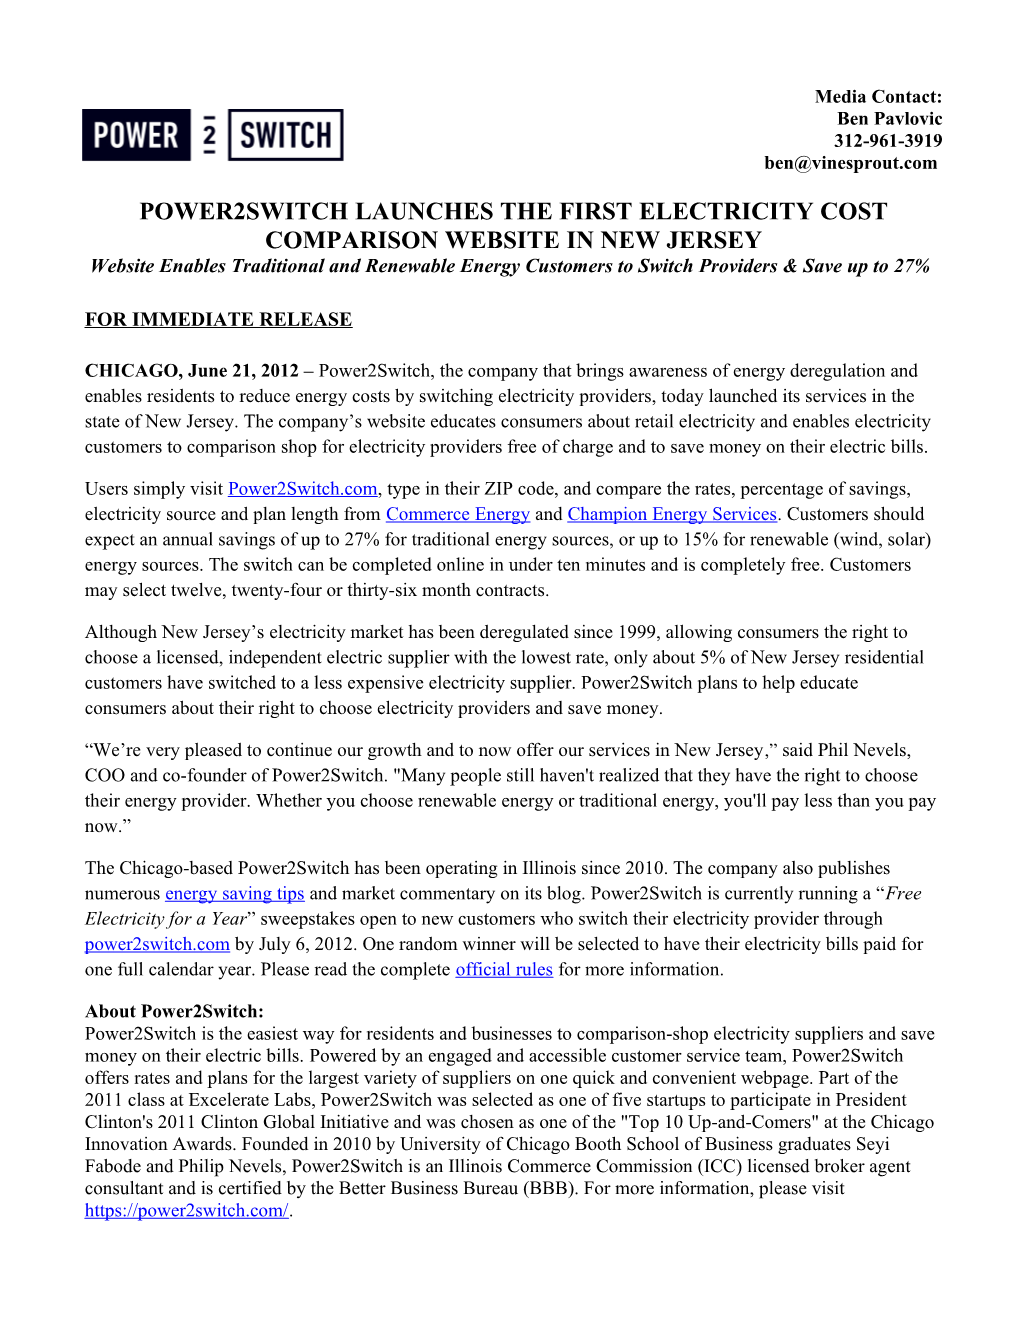 Power2switch Launches the First Electricity Cost Comparison Website in New Jersey